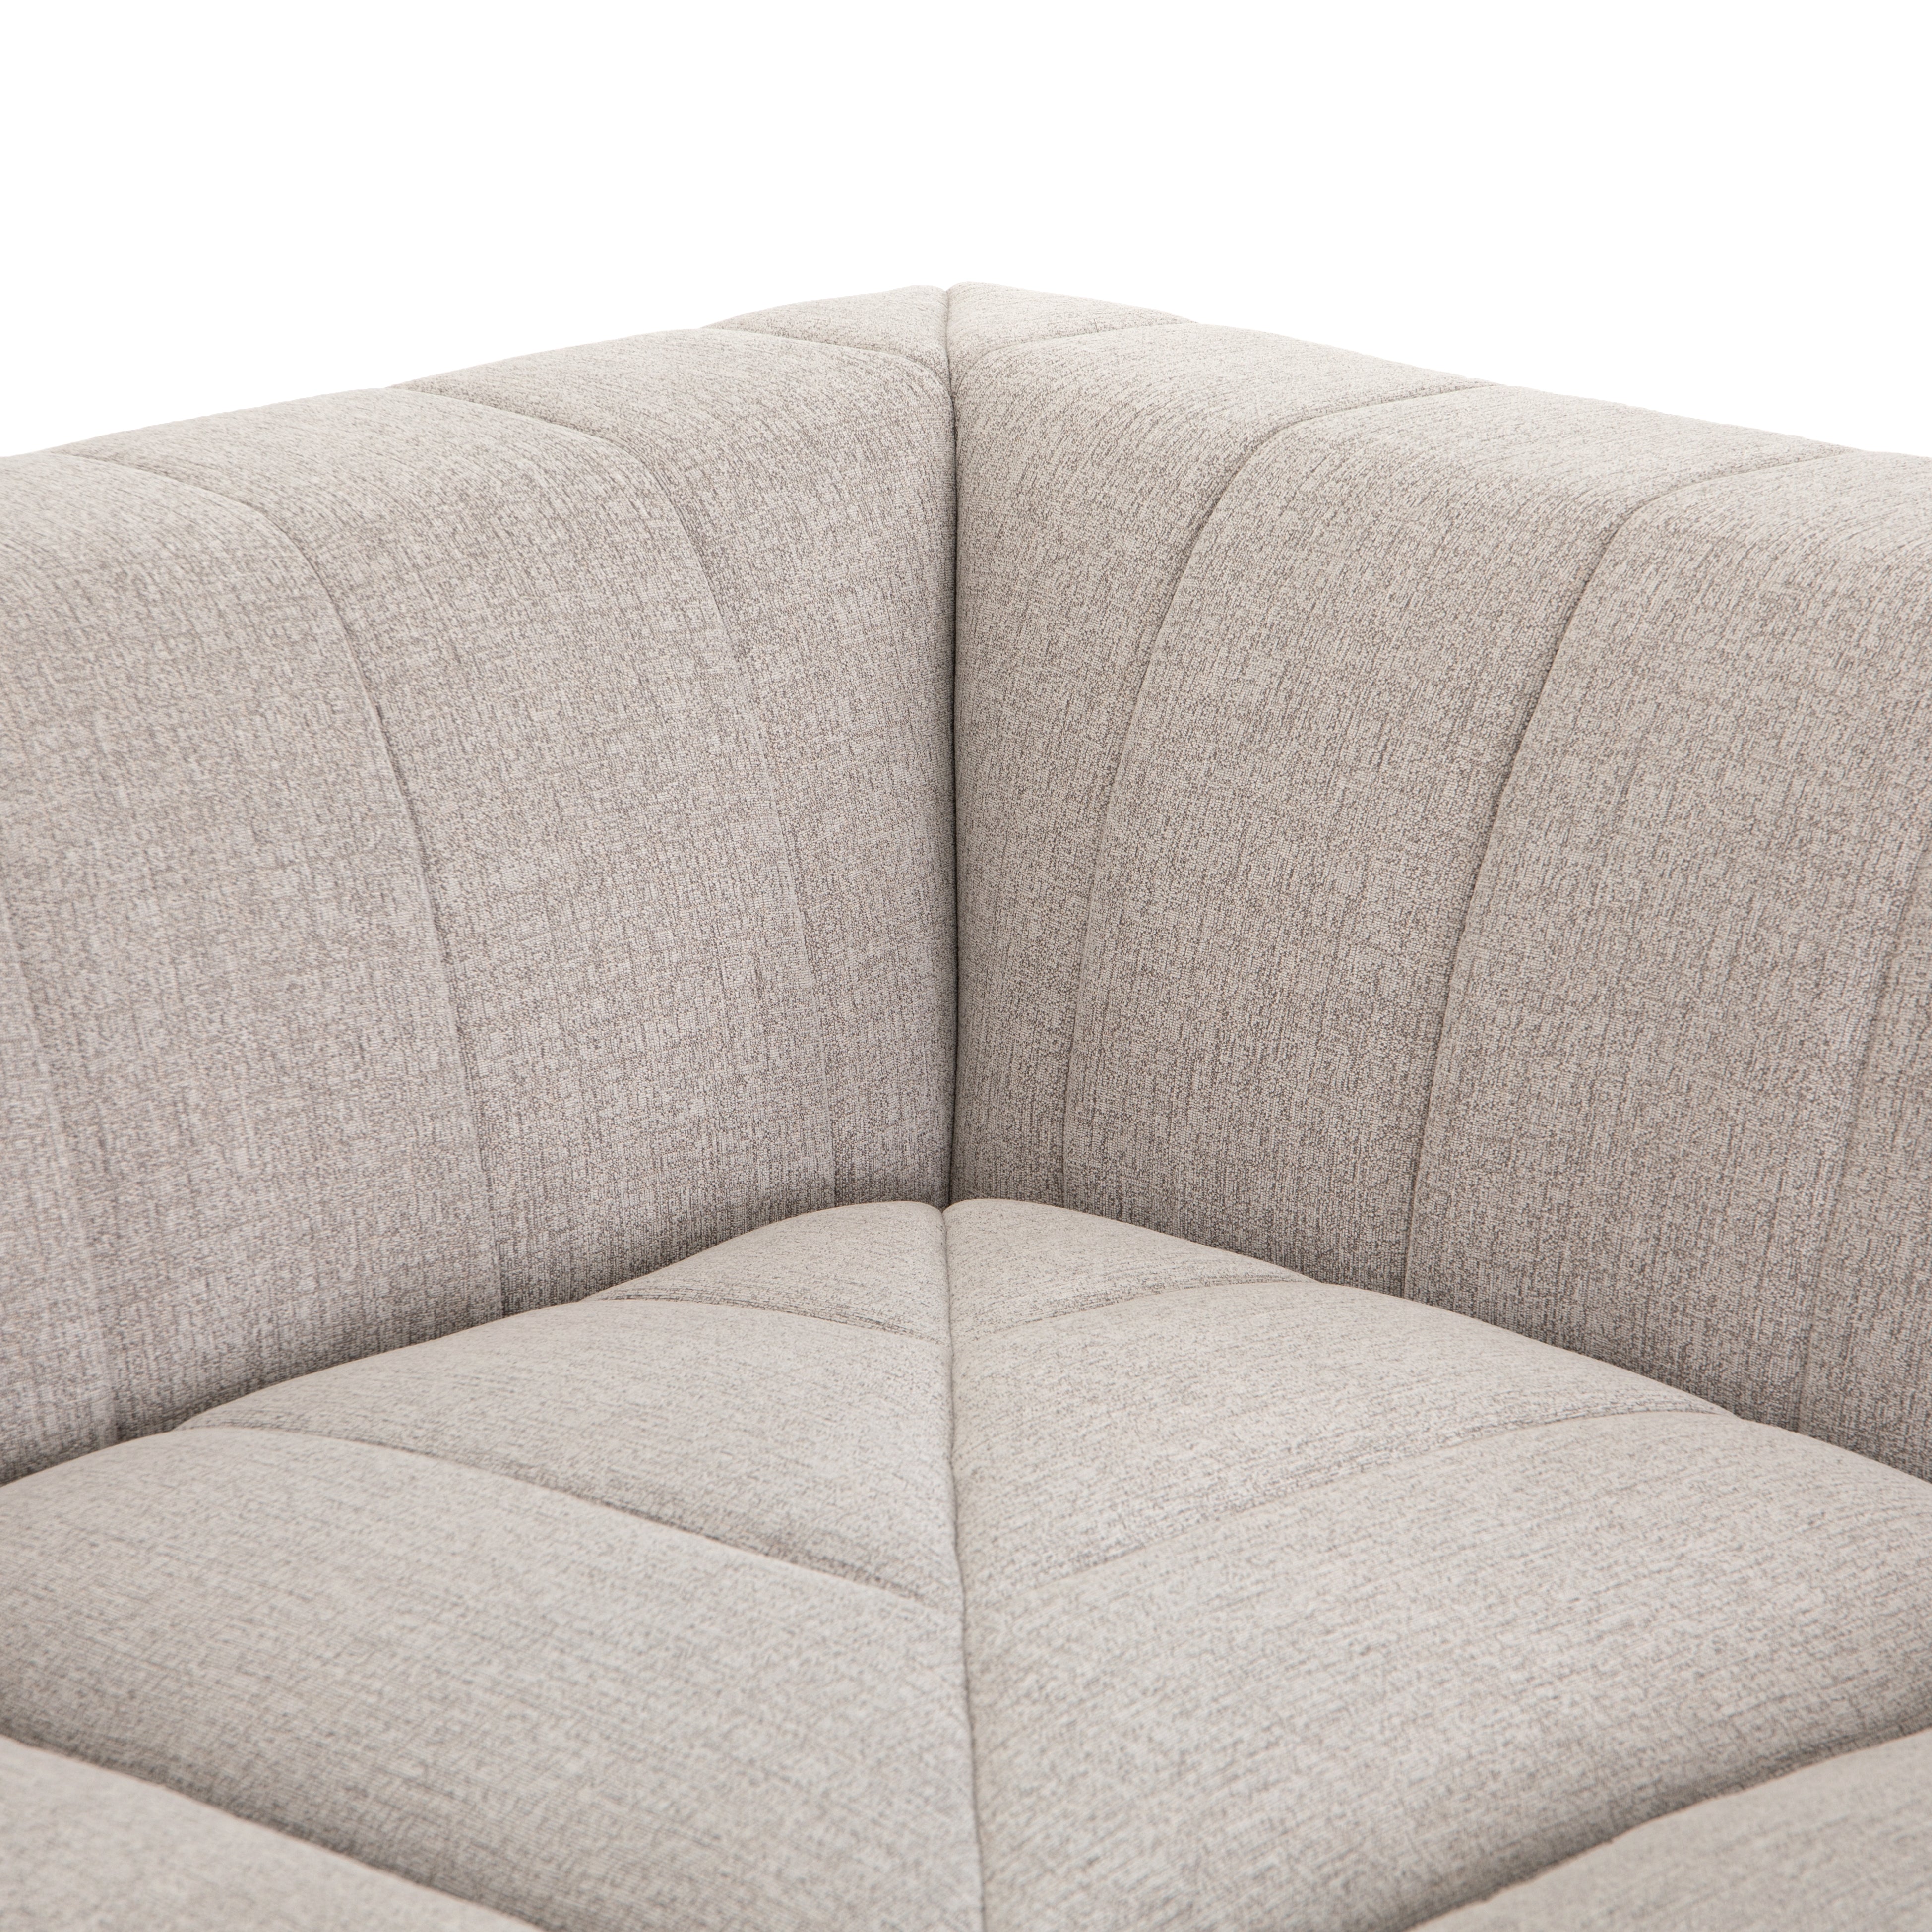 Langham Channeled 5-pc Sectional